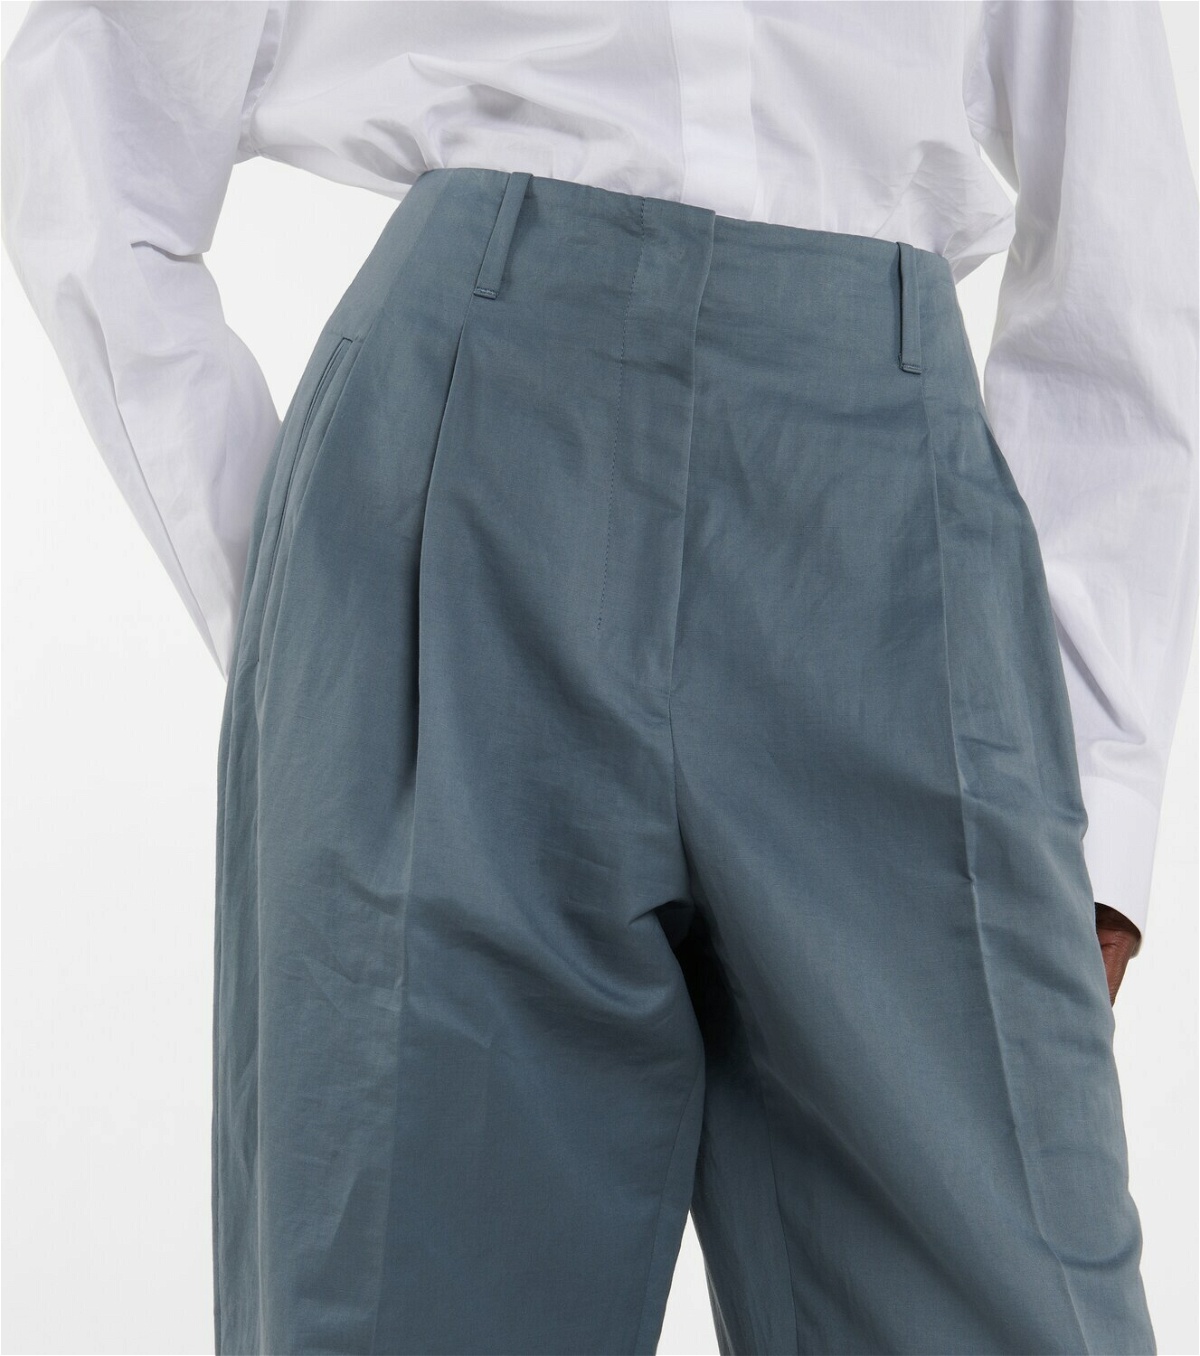 The Row Gaugin high-rise cotton and ramie pants The Row